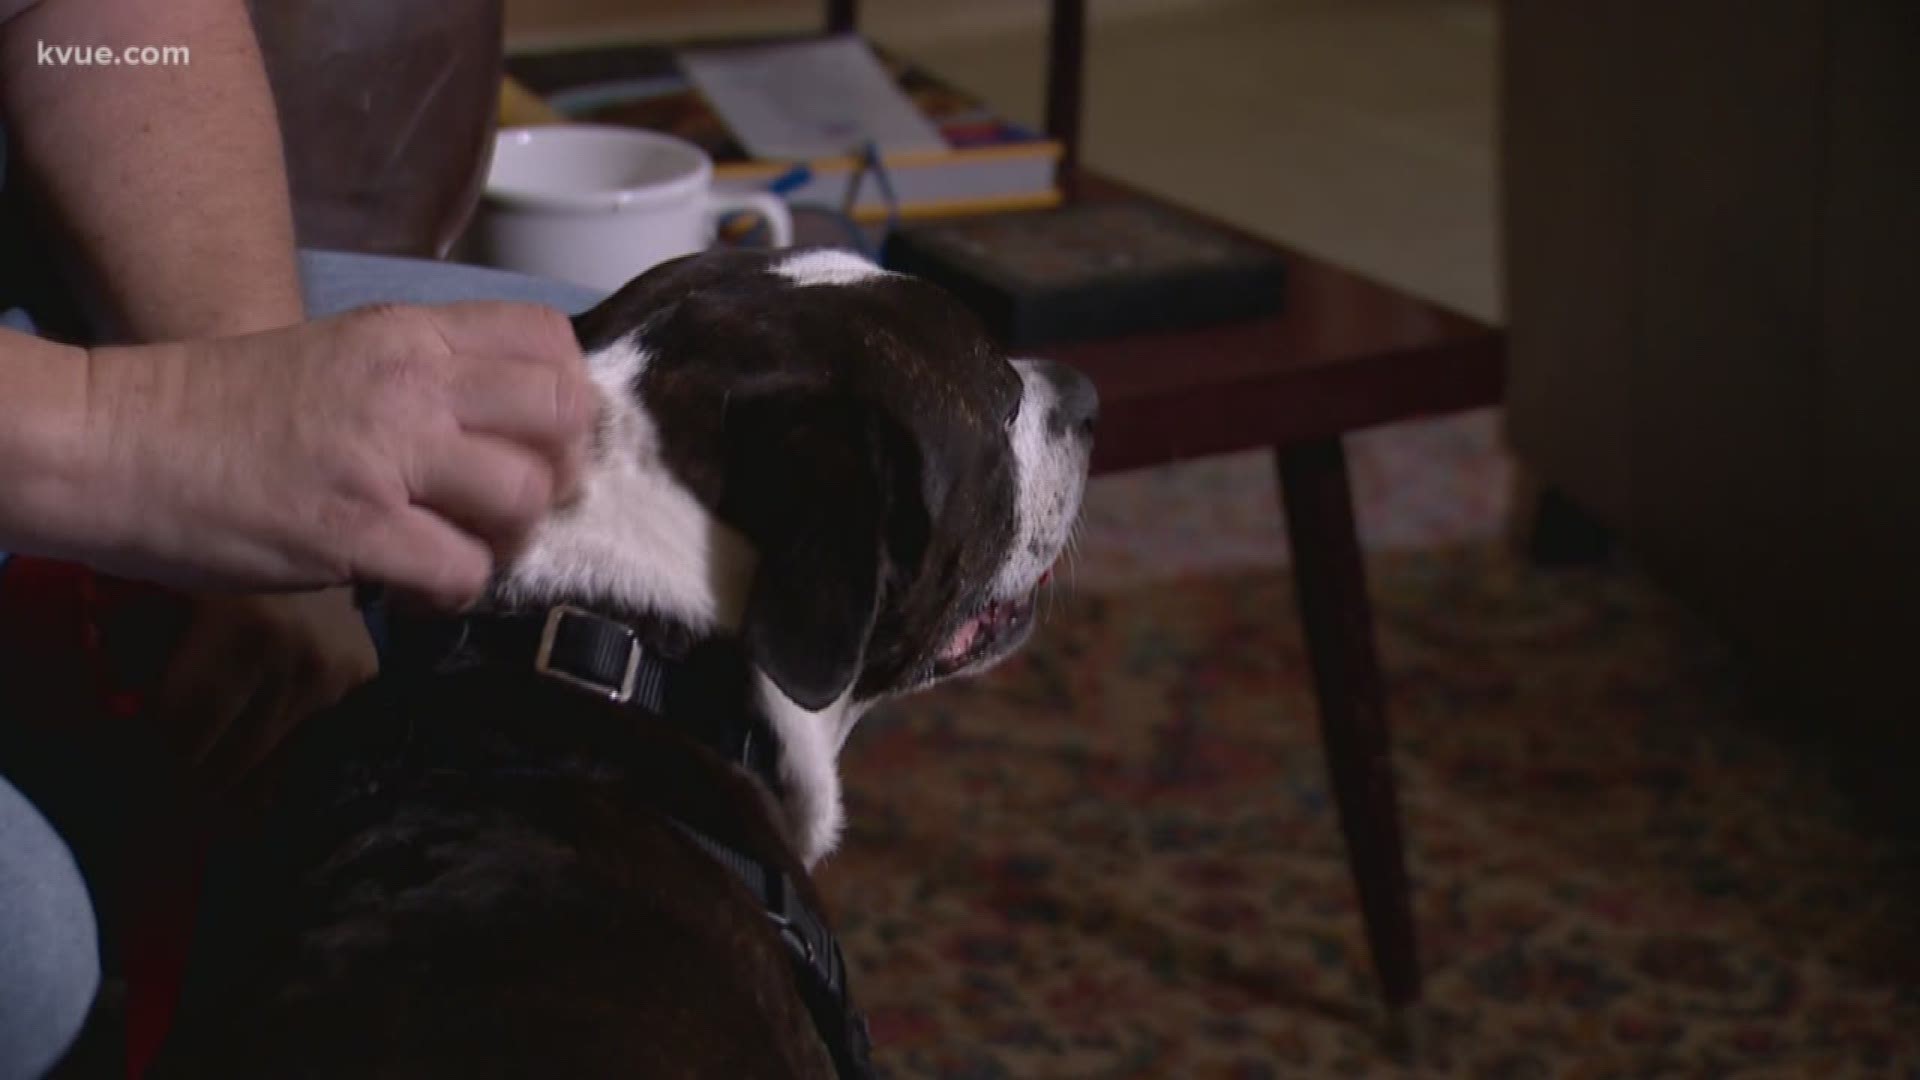 An Austin woman credits her dog with saving her life after she says he helped her discover her cancer.